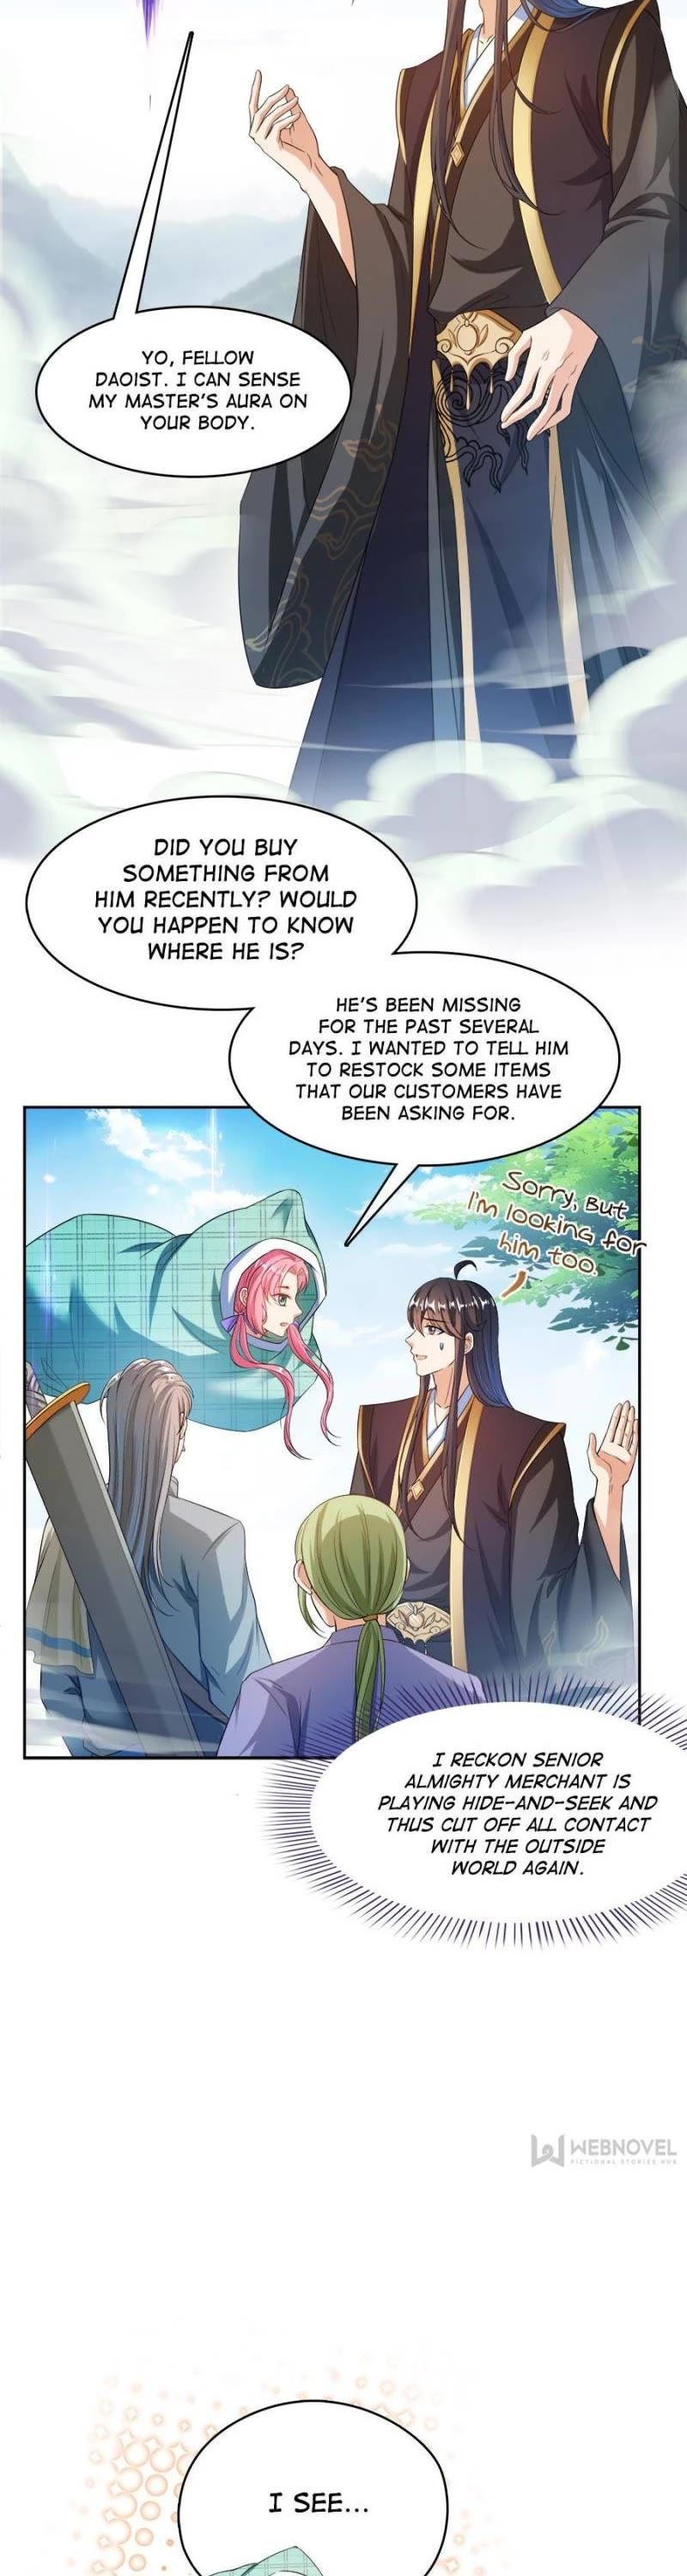 Cultivation Chat Group Chapter 473 page 6